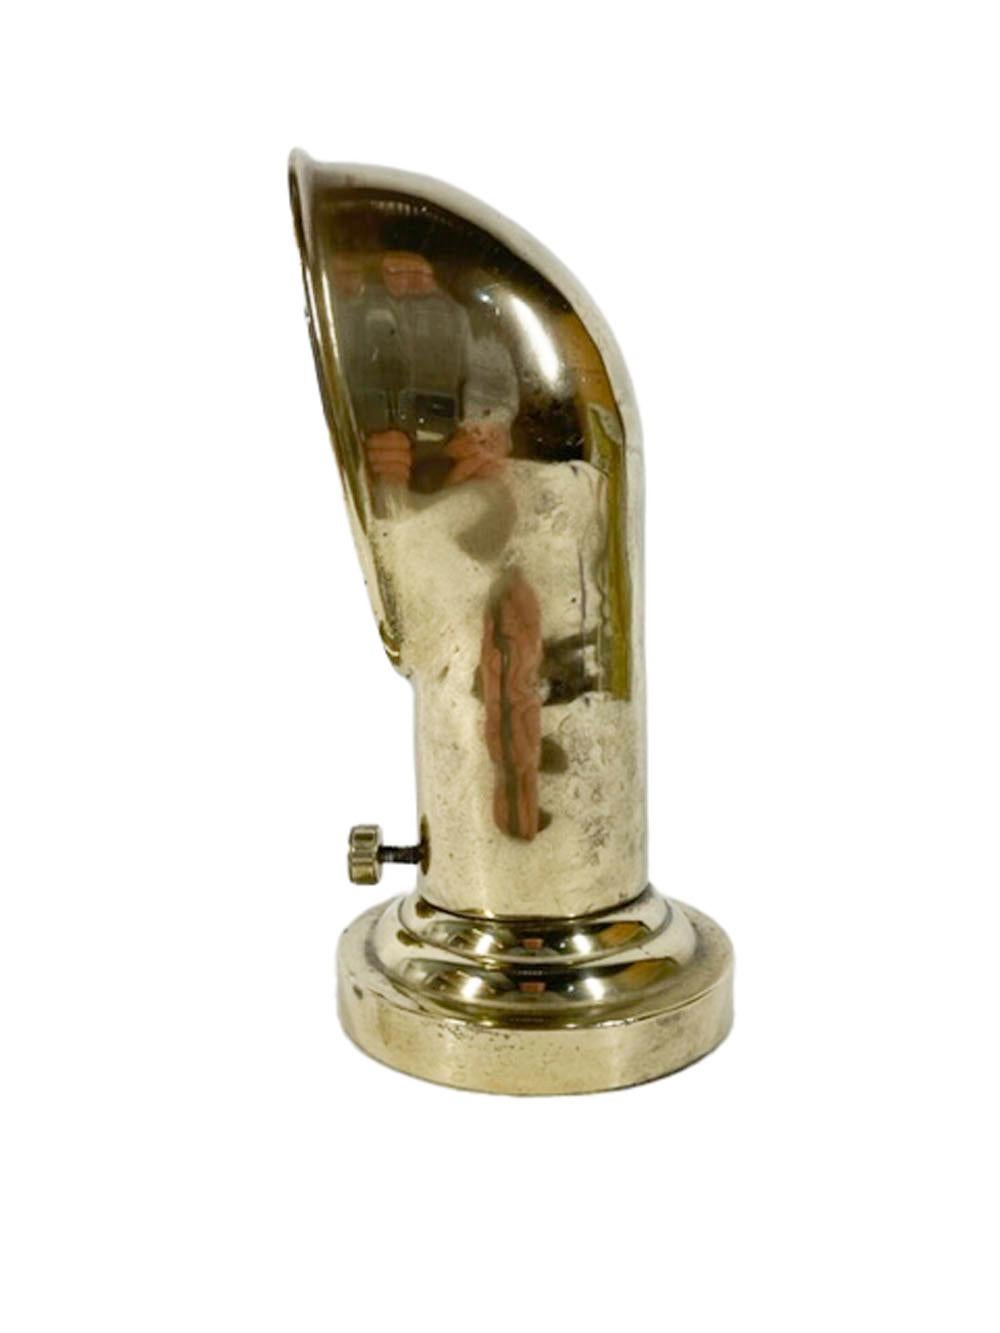 Mid-century sand-cast brass ashtray with a single rest in the form of a ships vent cowl, the pressure fit stepped base can be removed for emptying and cleaning.